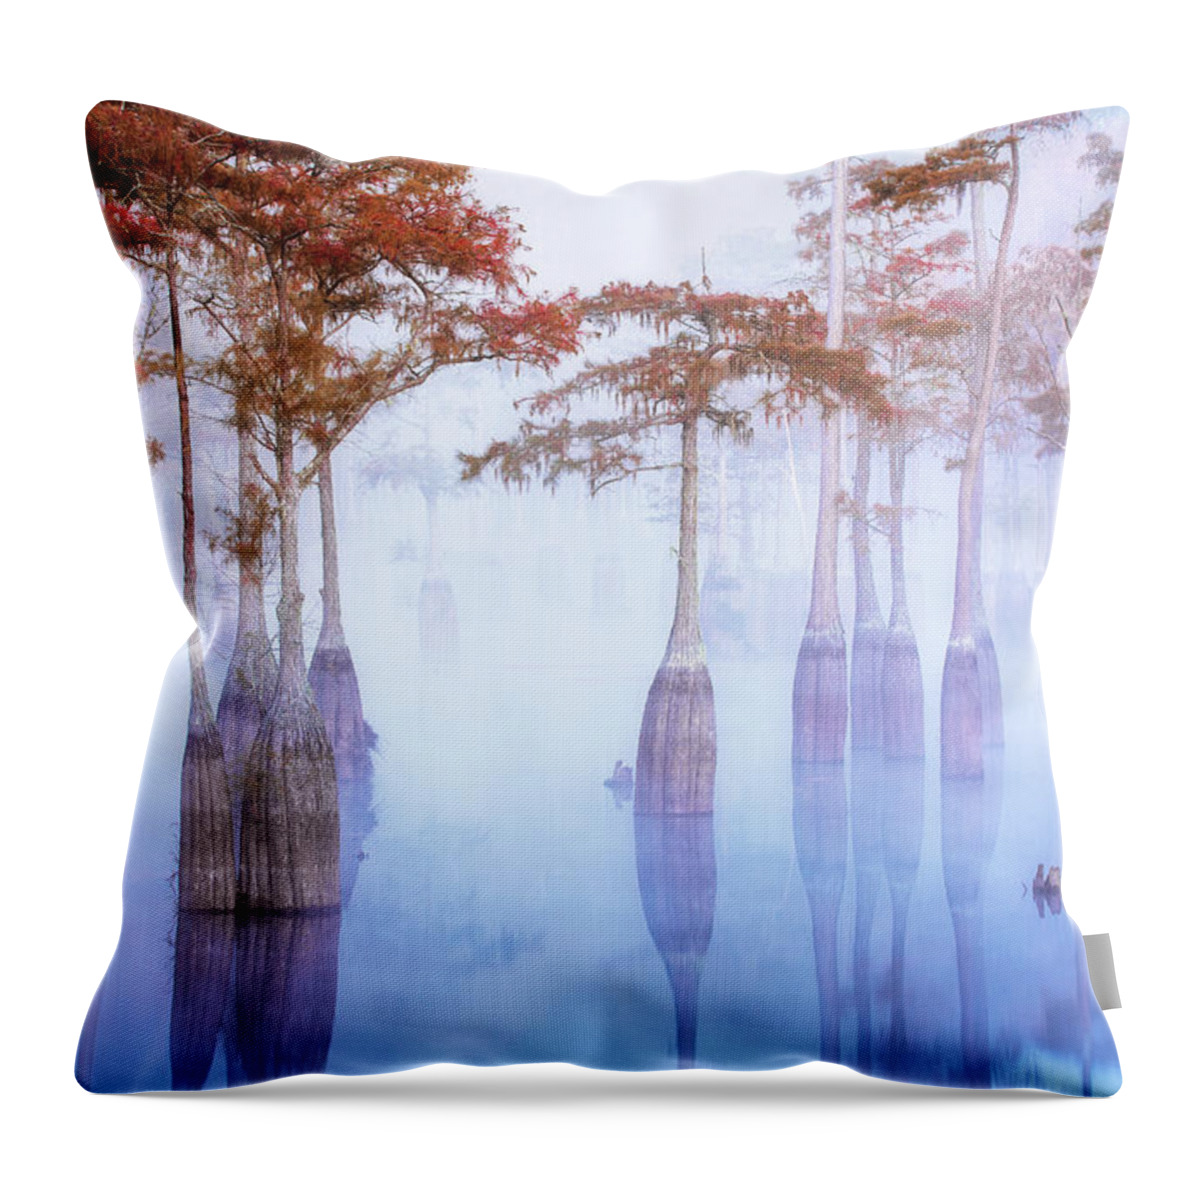 Abstract Throw Pillow featuring the photograph Cypress at Down with Fog by Alex Mironyuk